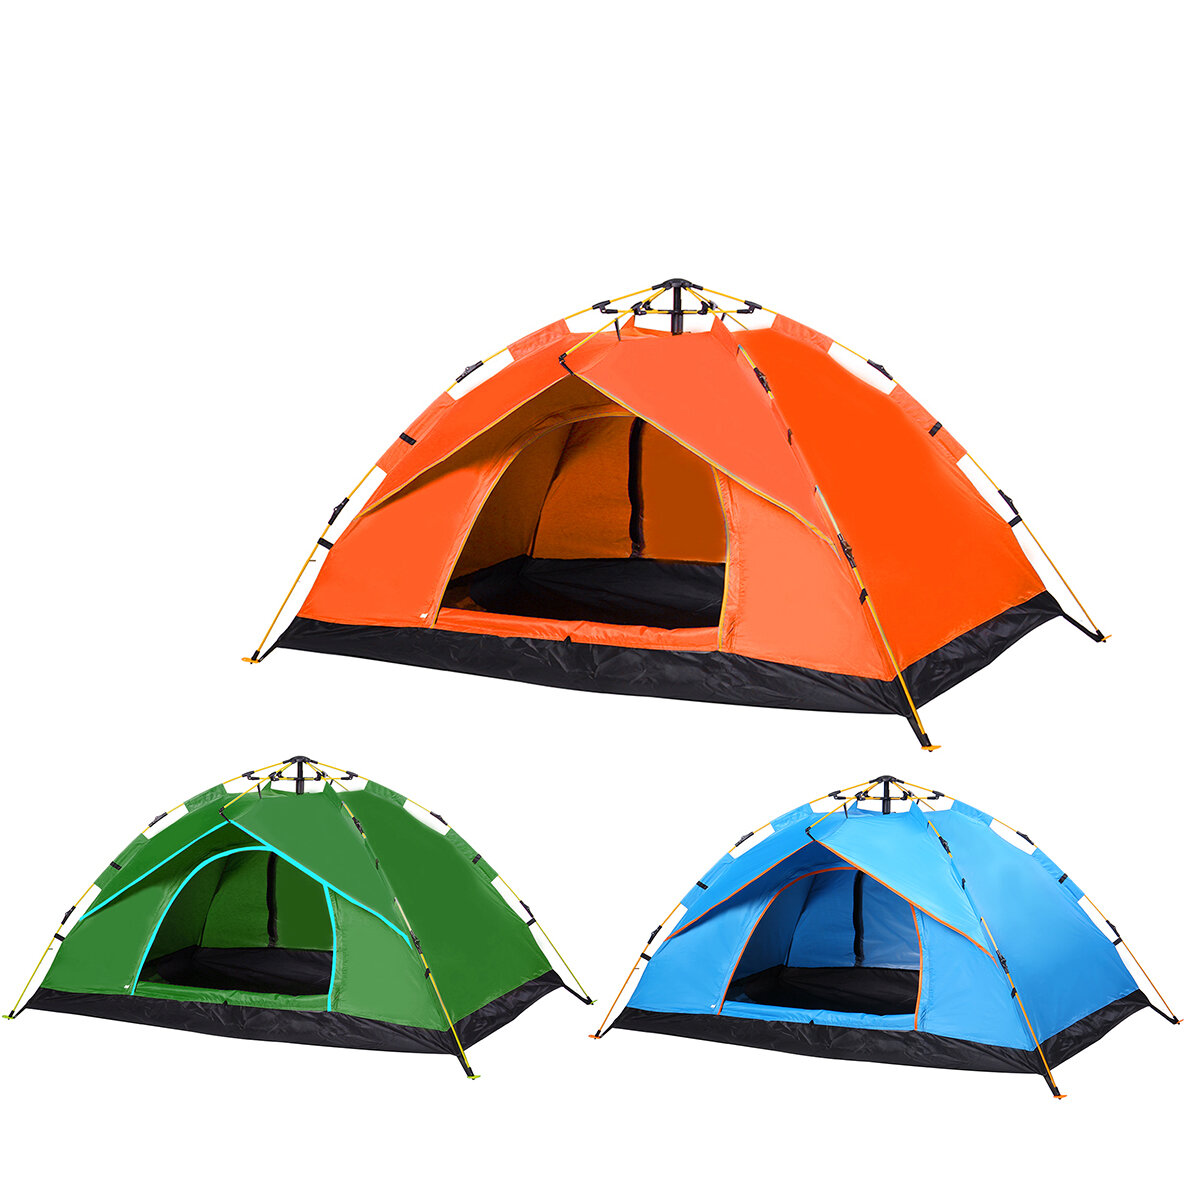 1-2 People Single Layer Full Automatic Camping Tent Folding Thick Rainproof Outdoors Hiking Travel